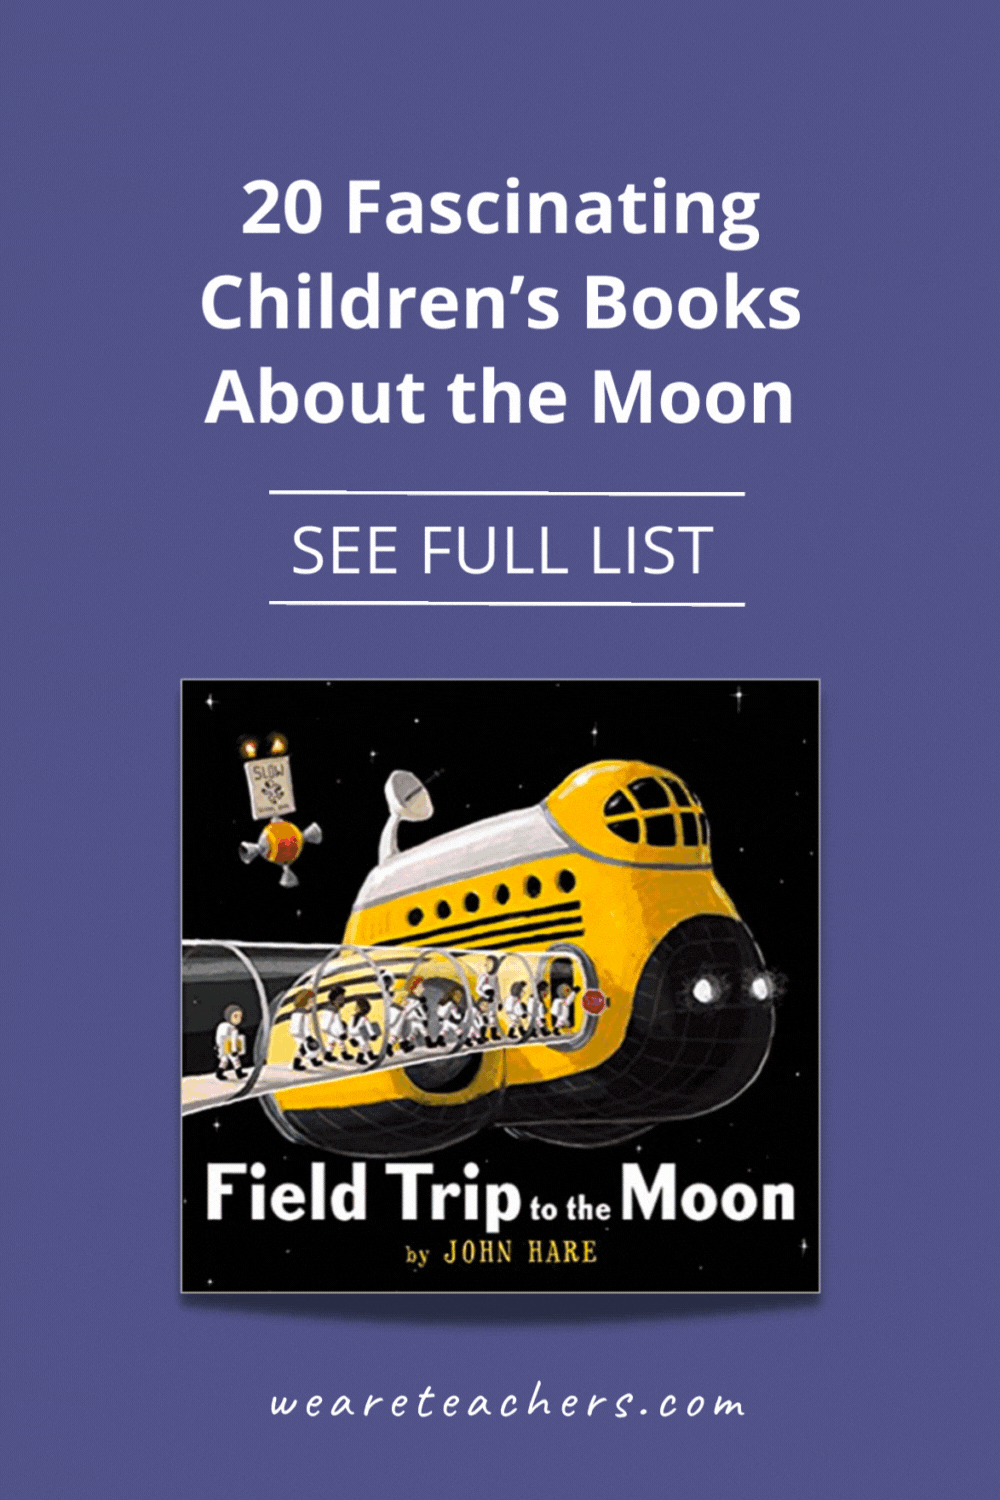 Ready for some lunar learning? Add these stories and informational children's books about the moon to your classroom library!